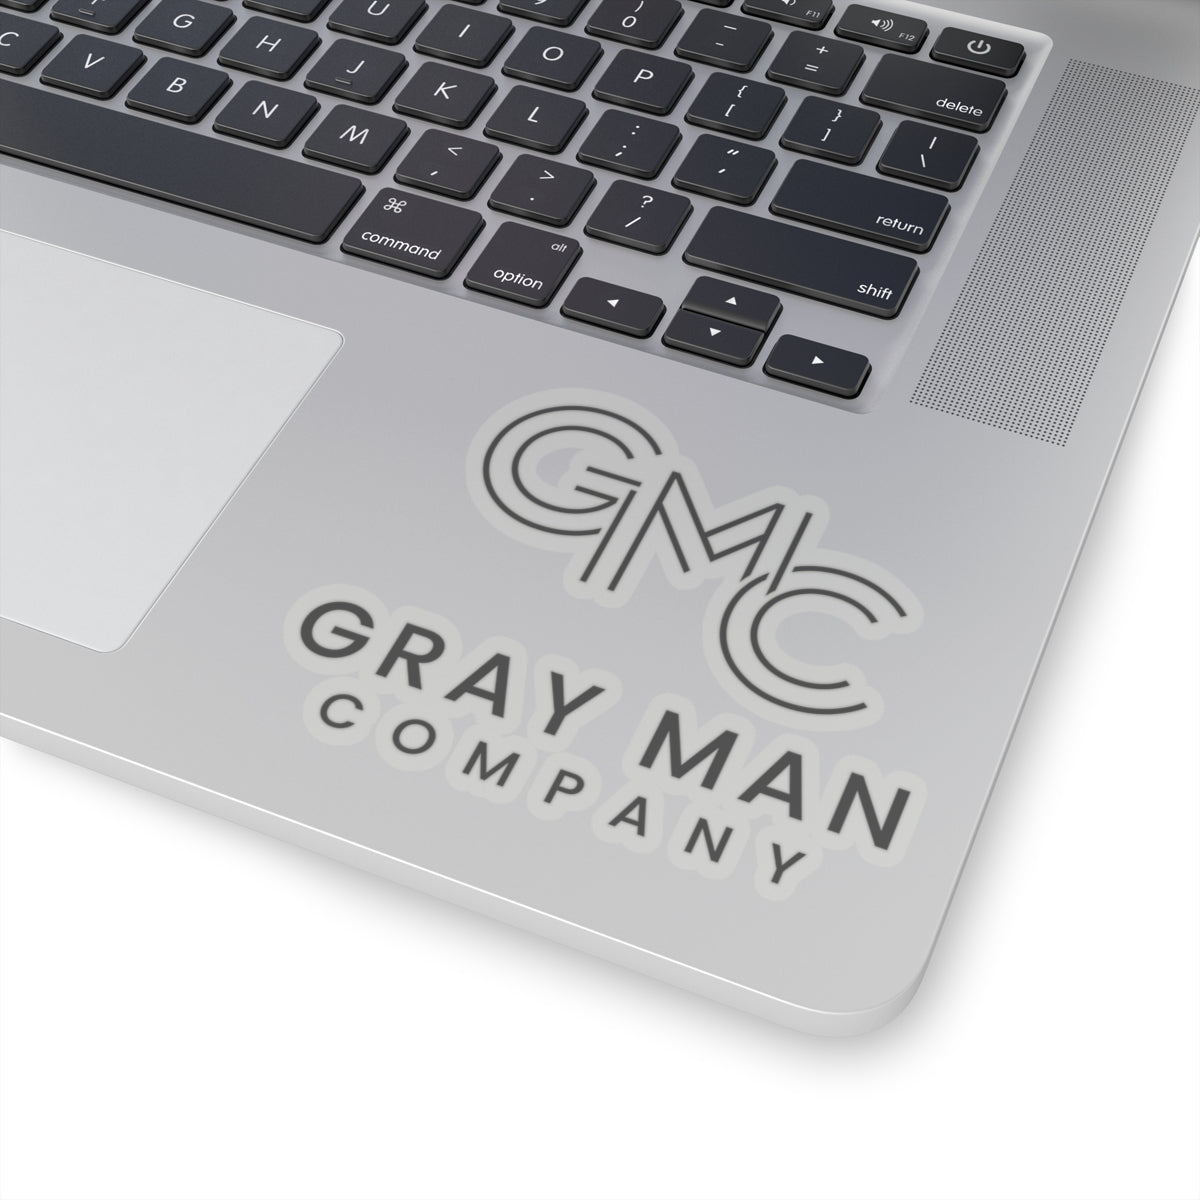 Gray Man Company OFFICIAL Stickers (Black)